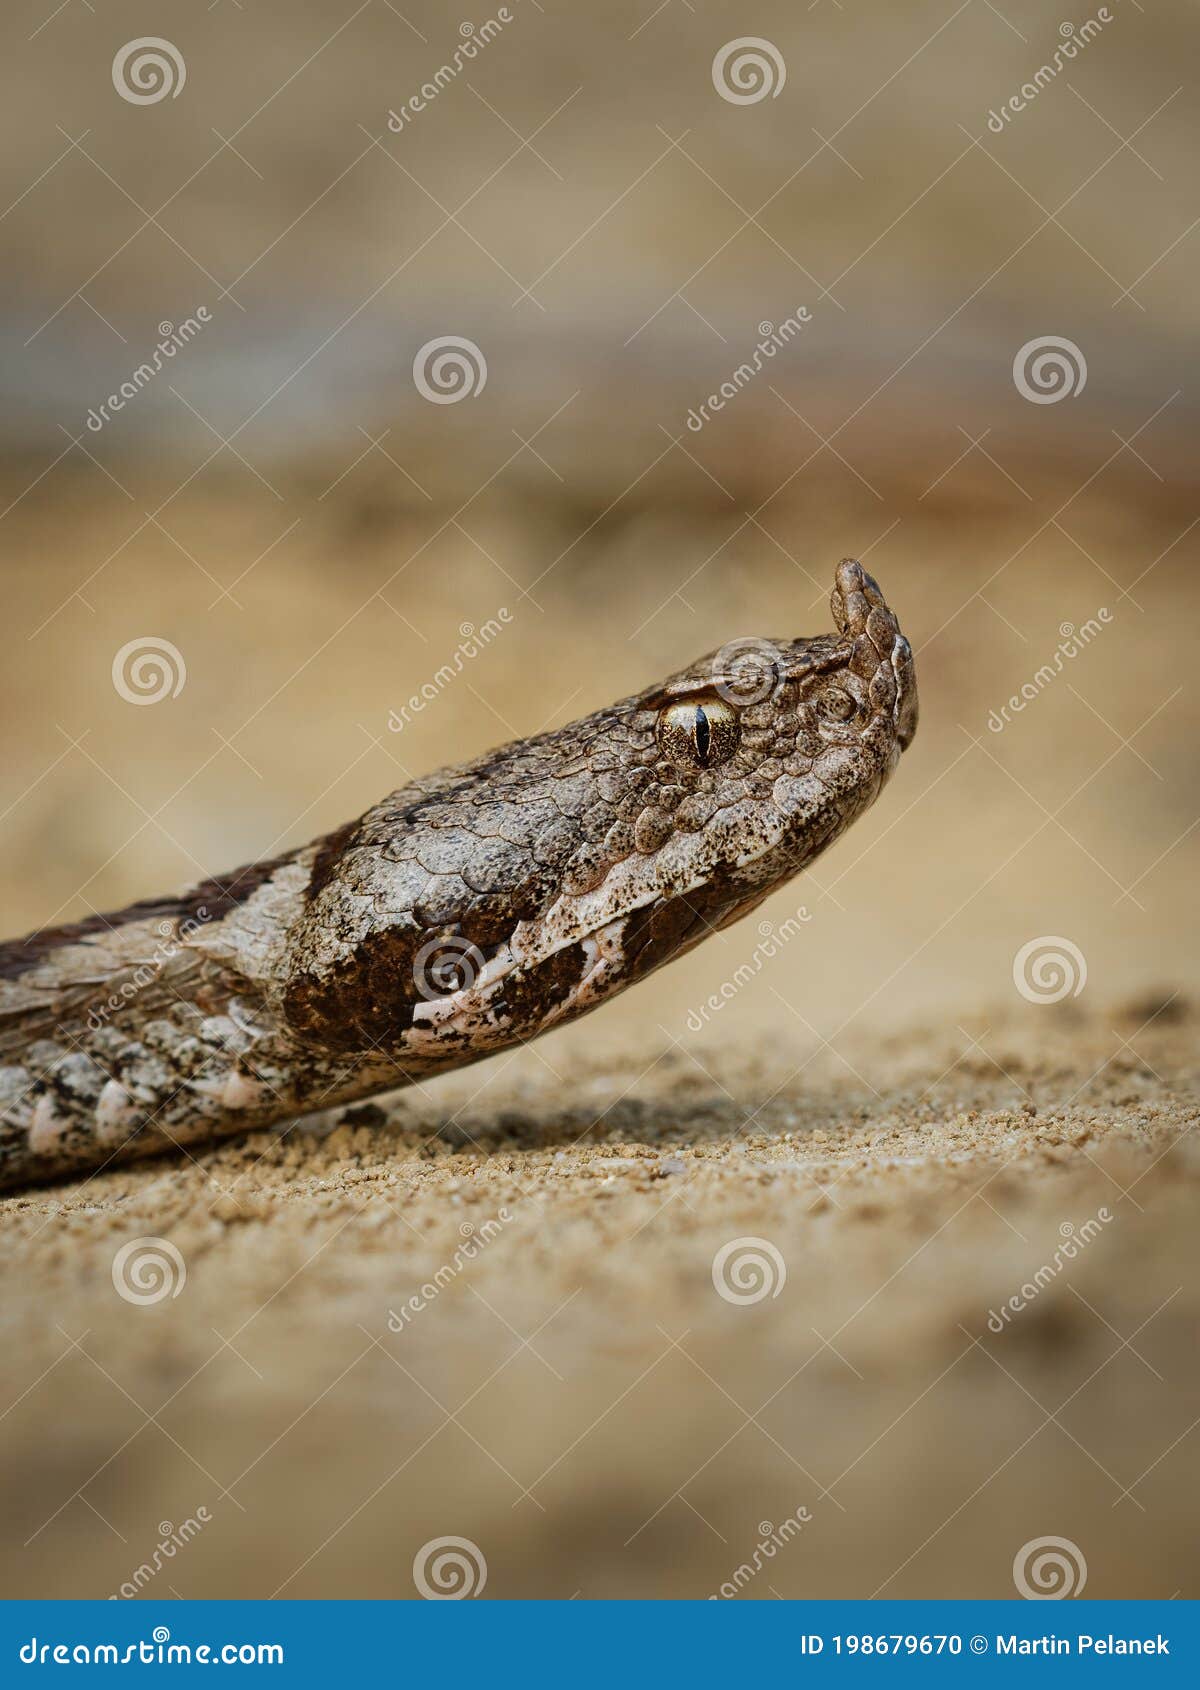 nose-horned viper - vipera ammodytes also horned or long-nosed viper, nose-horned viper or sand viper, species found in southern